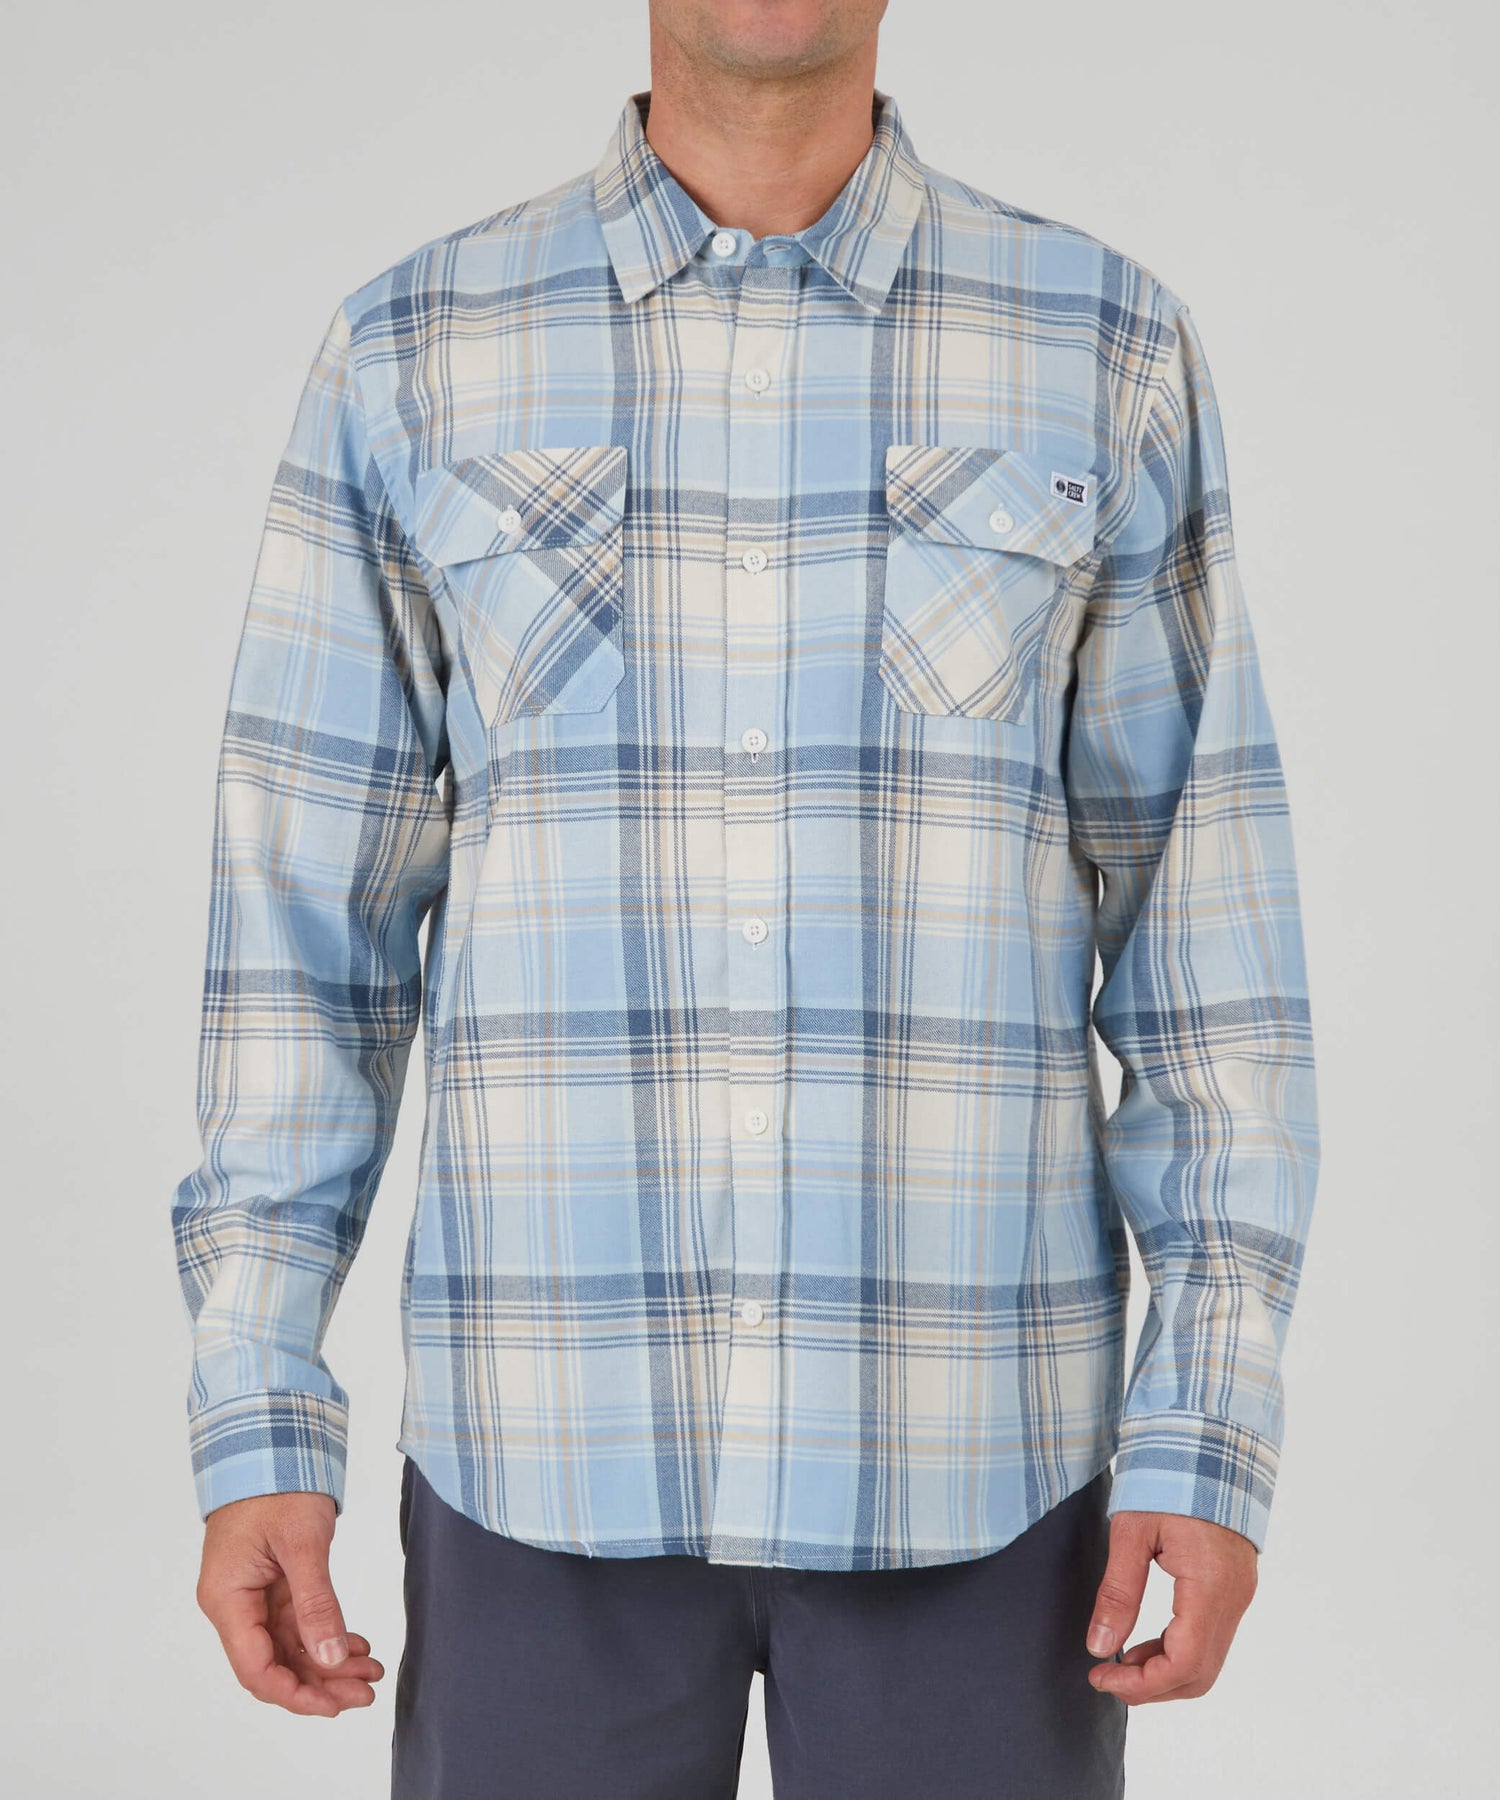 Salty crew WOVEN SHIRTS Frothing Flannel - Wax/Blue in Wax/Blue